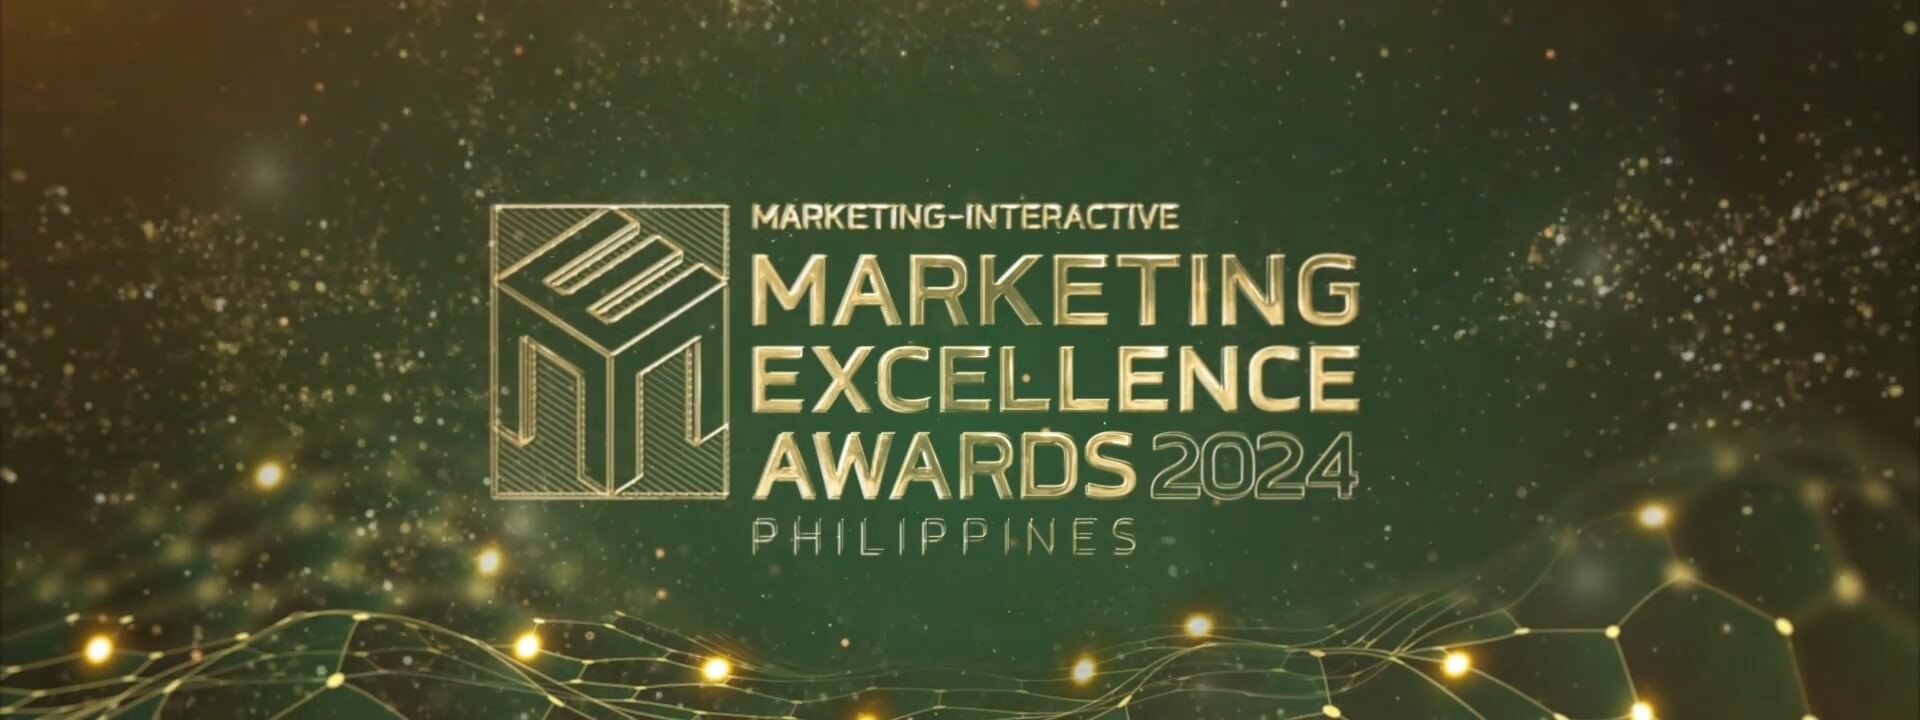 Award Categories Marketing Excellence Awards 2024 Philippines